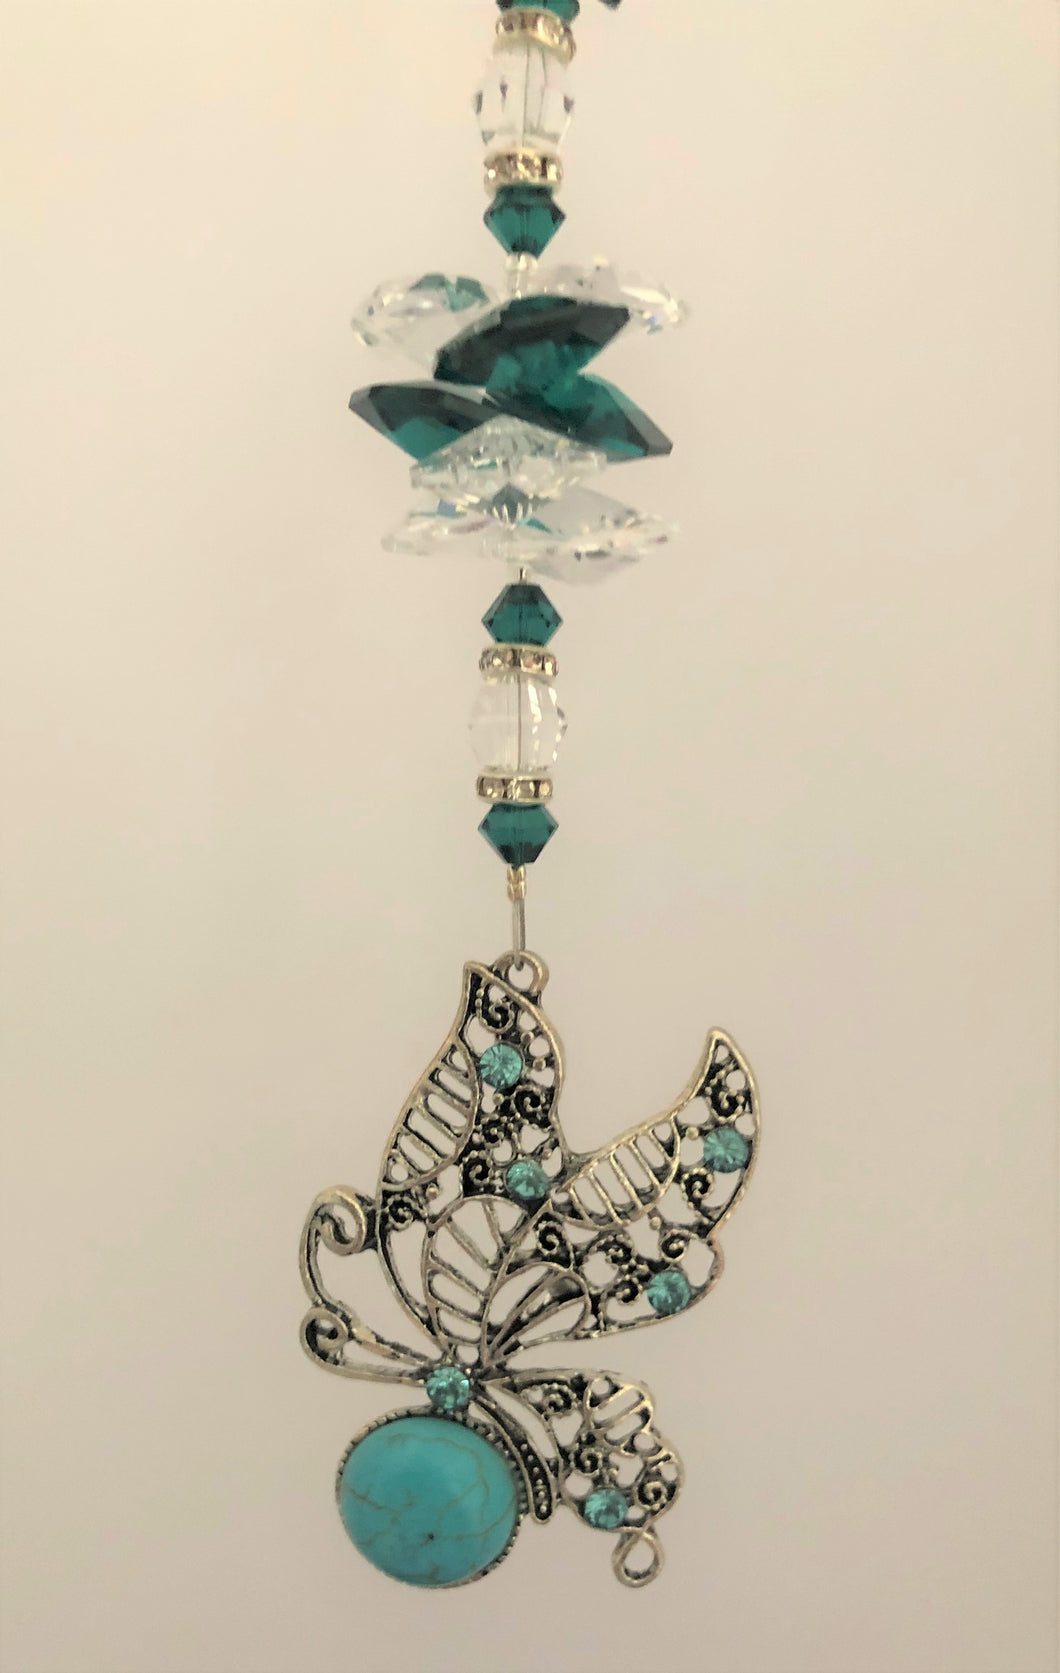 This beautiful sparkle butterfly suncatcher which is decorated with crystals & malachite